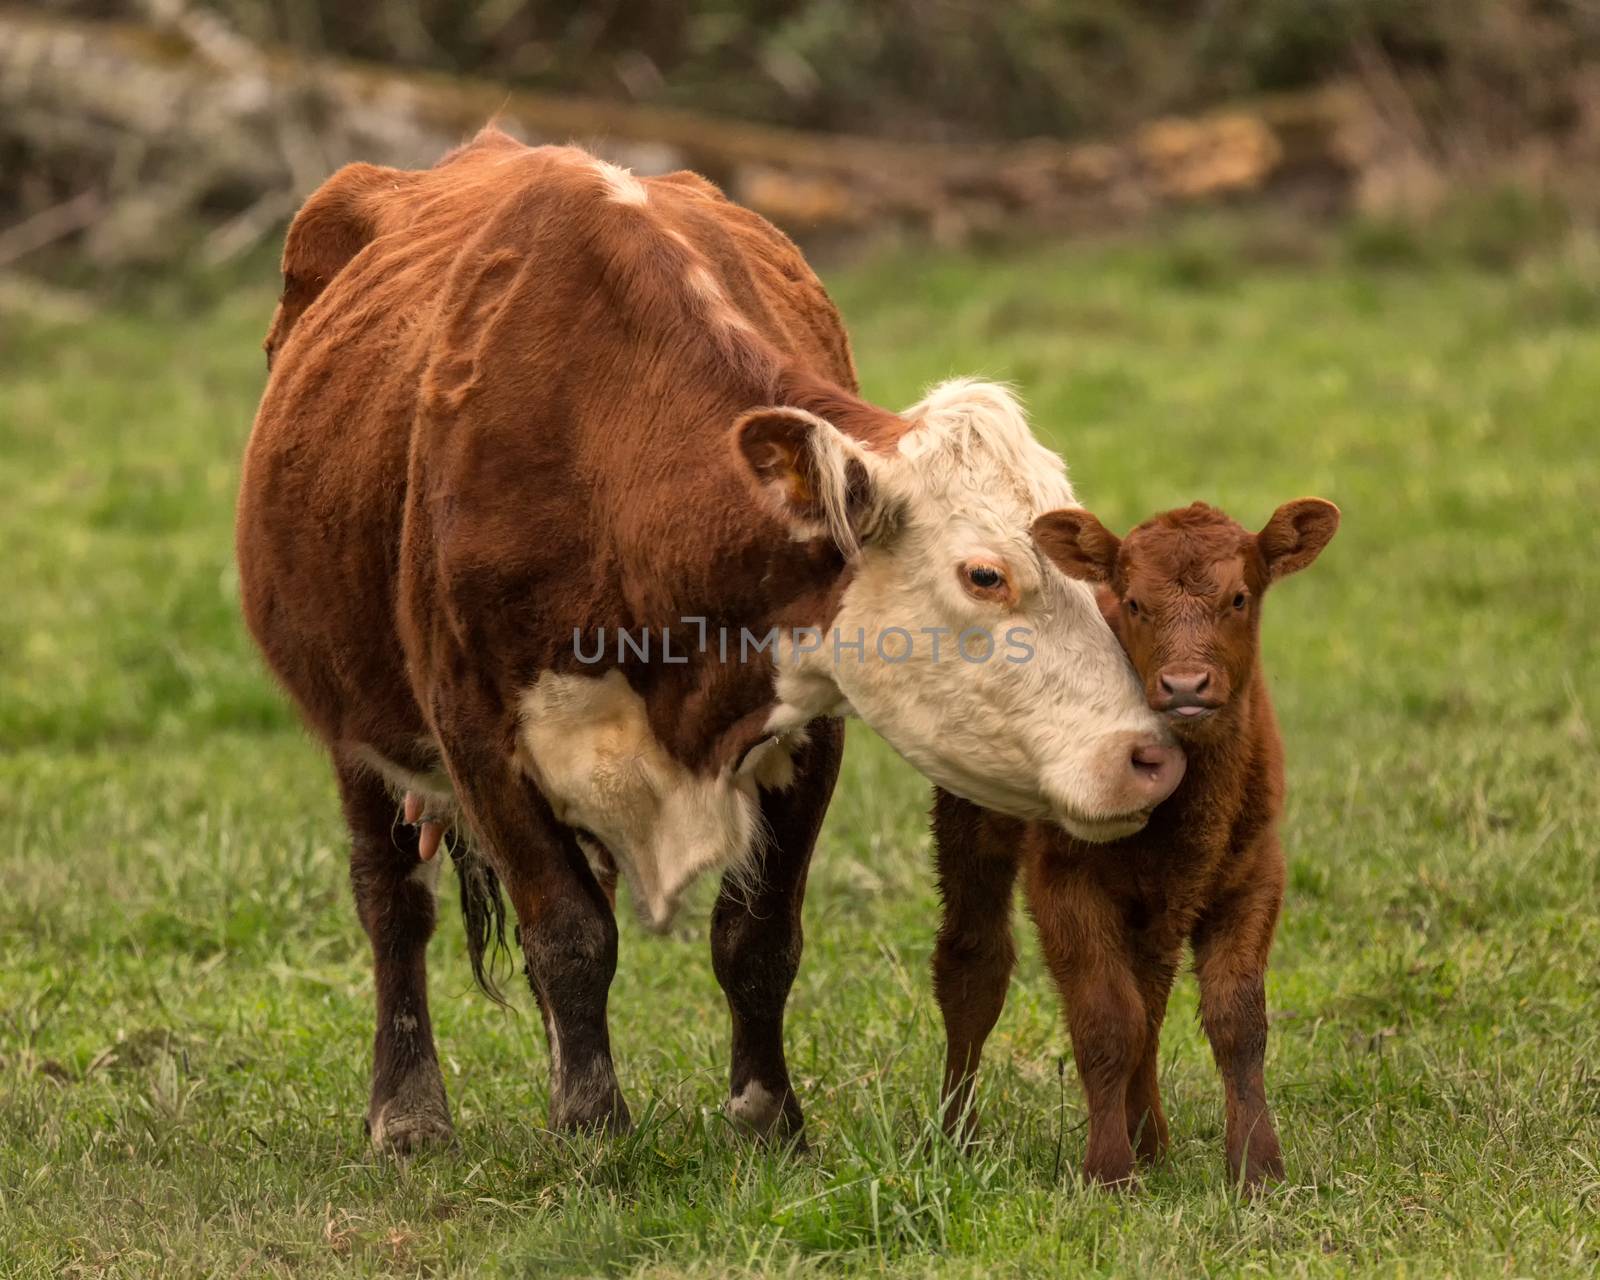 Momma Cow and Calf, Color Image, Northern California, USA